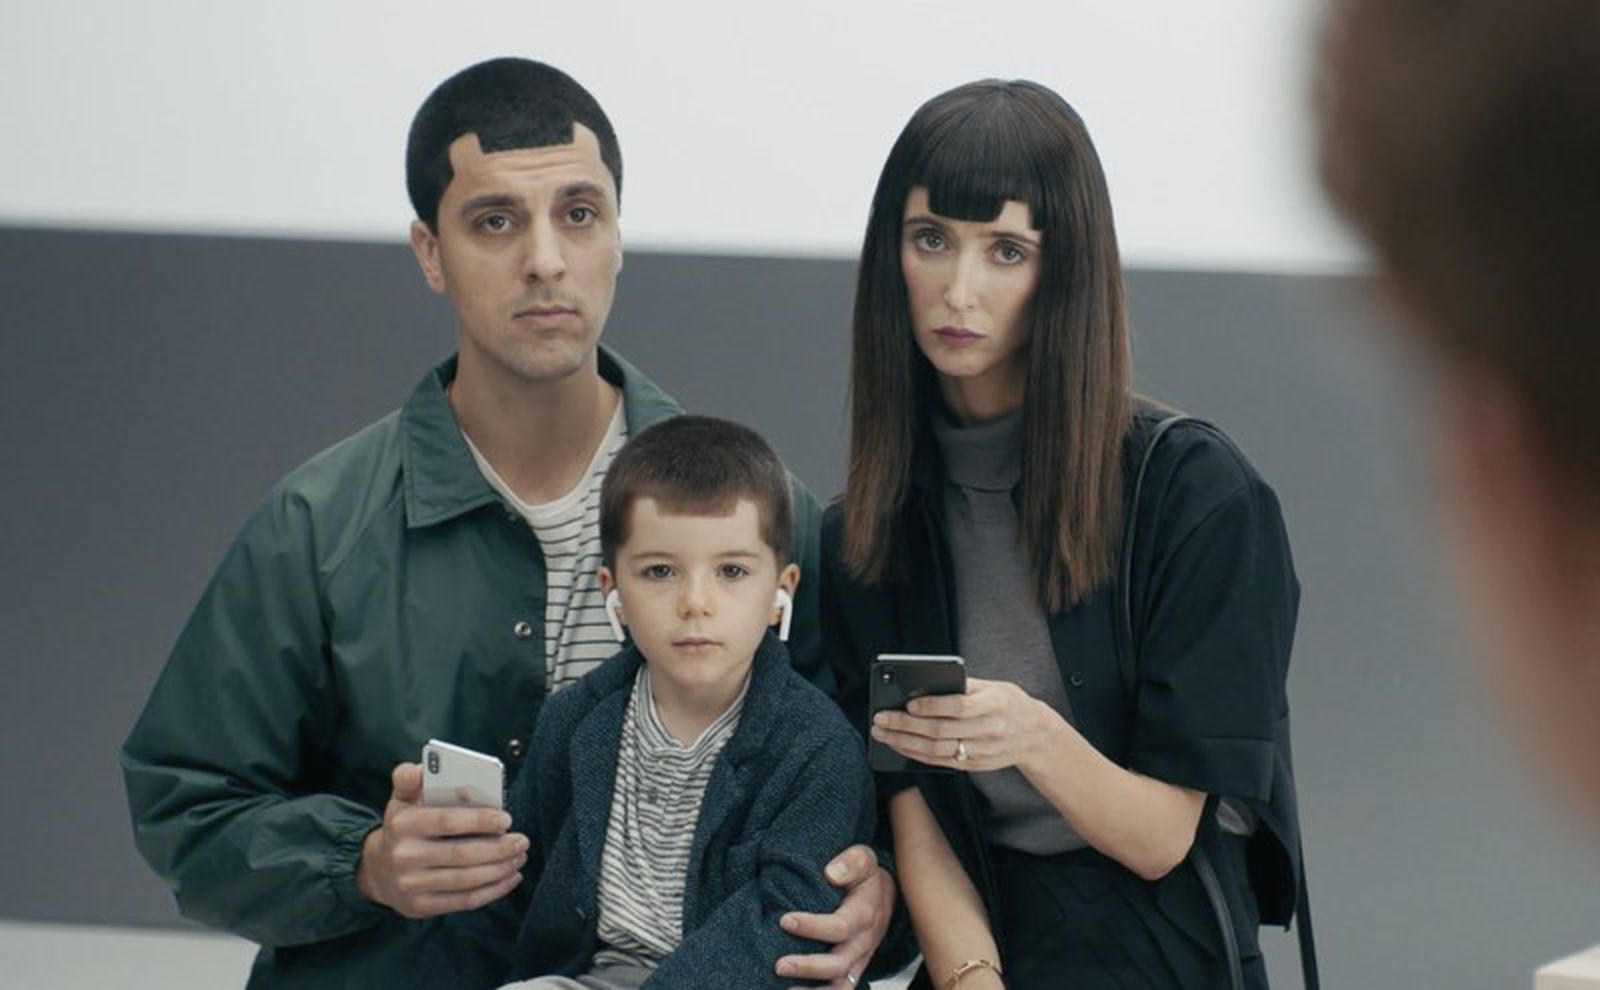 Samsung Shares Three New Ads Making Fun Of The Iphone Xs Notch Lack Of Sd Card Slot And No 1874